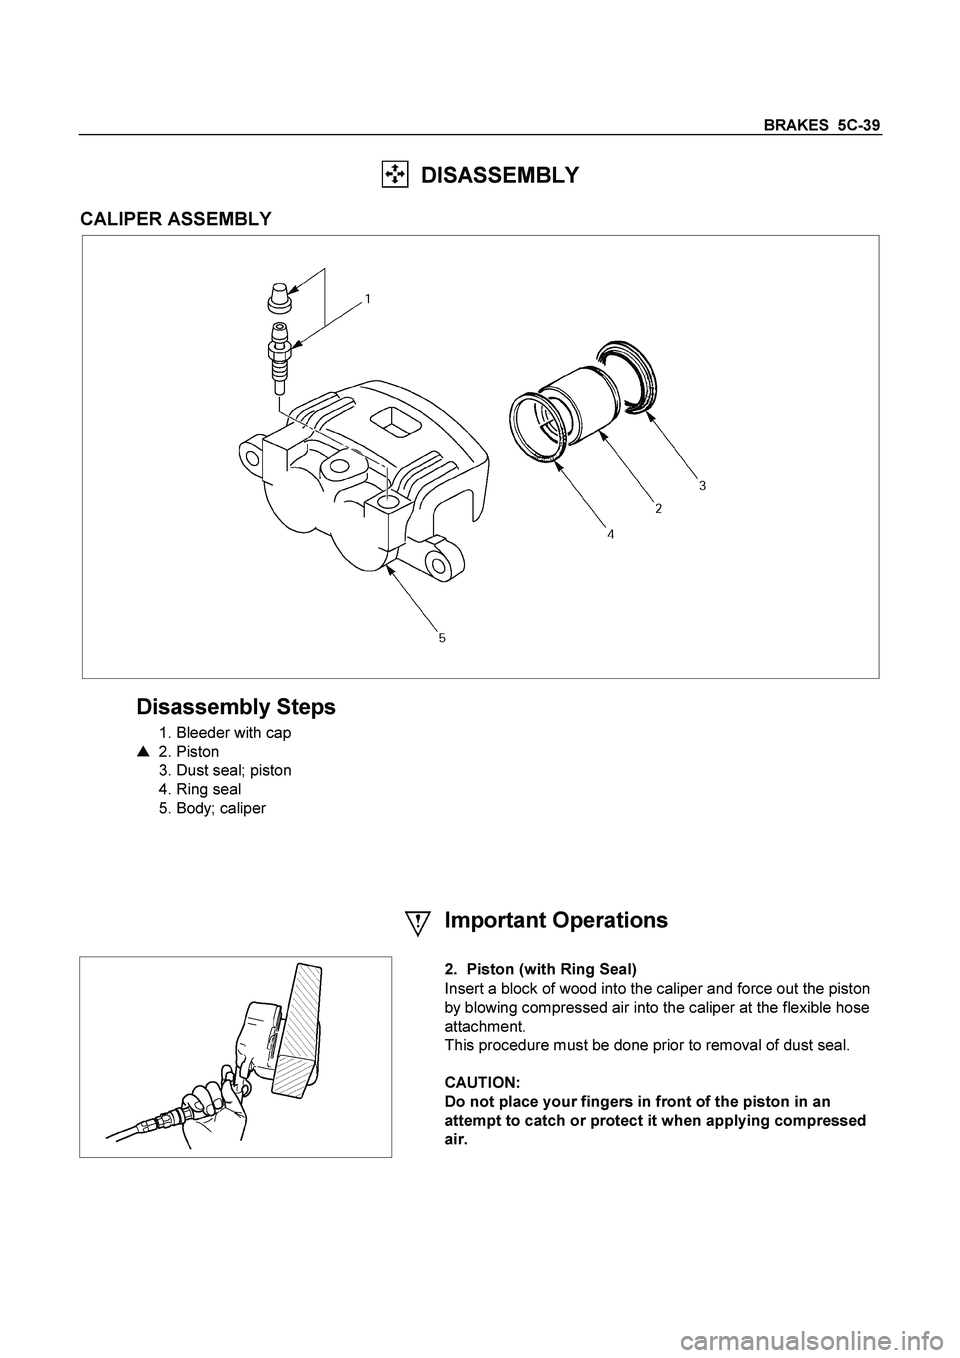 ISUZU TF SERIES 2004  Workshop Manual BRAKES  5C-39 
  DISASSEMBLY 
 
CALIPER ASSEMBLY 
  
 
Disassembly Steps 
  1. Bleeder with cap  
   2. Piston  
  3. Dust seal; piston  
  4. Ring seal  
  5. Body; caliper 
    
 
  
  
 
  
  
 
I